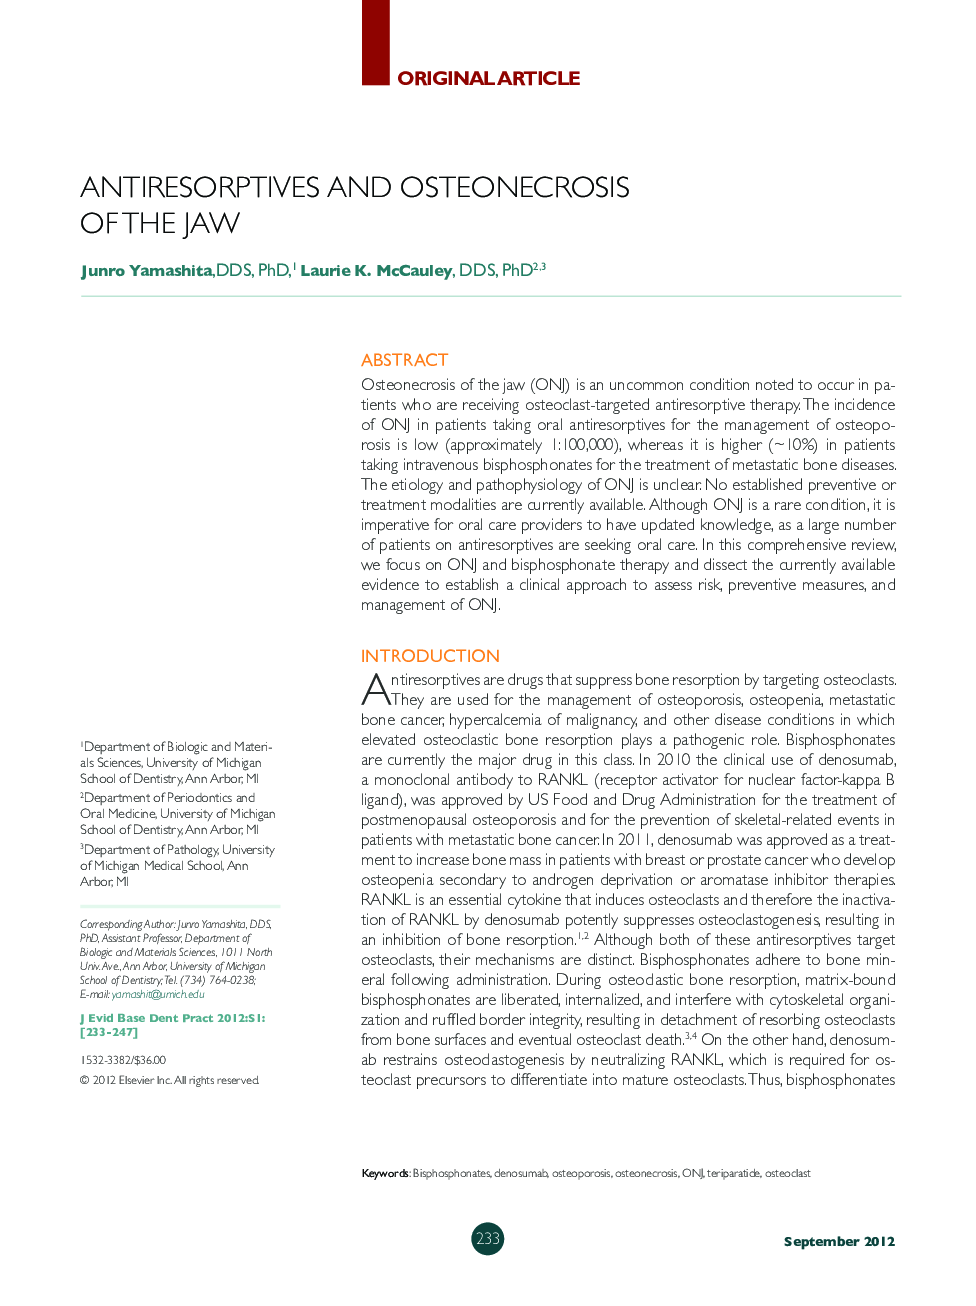 Antiresorptives and Osteonecrosis of the Jaw